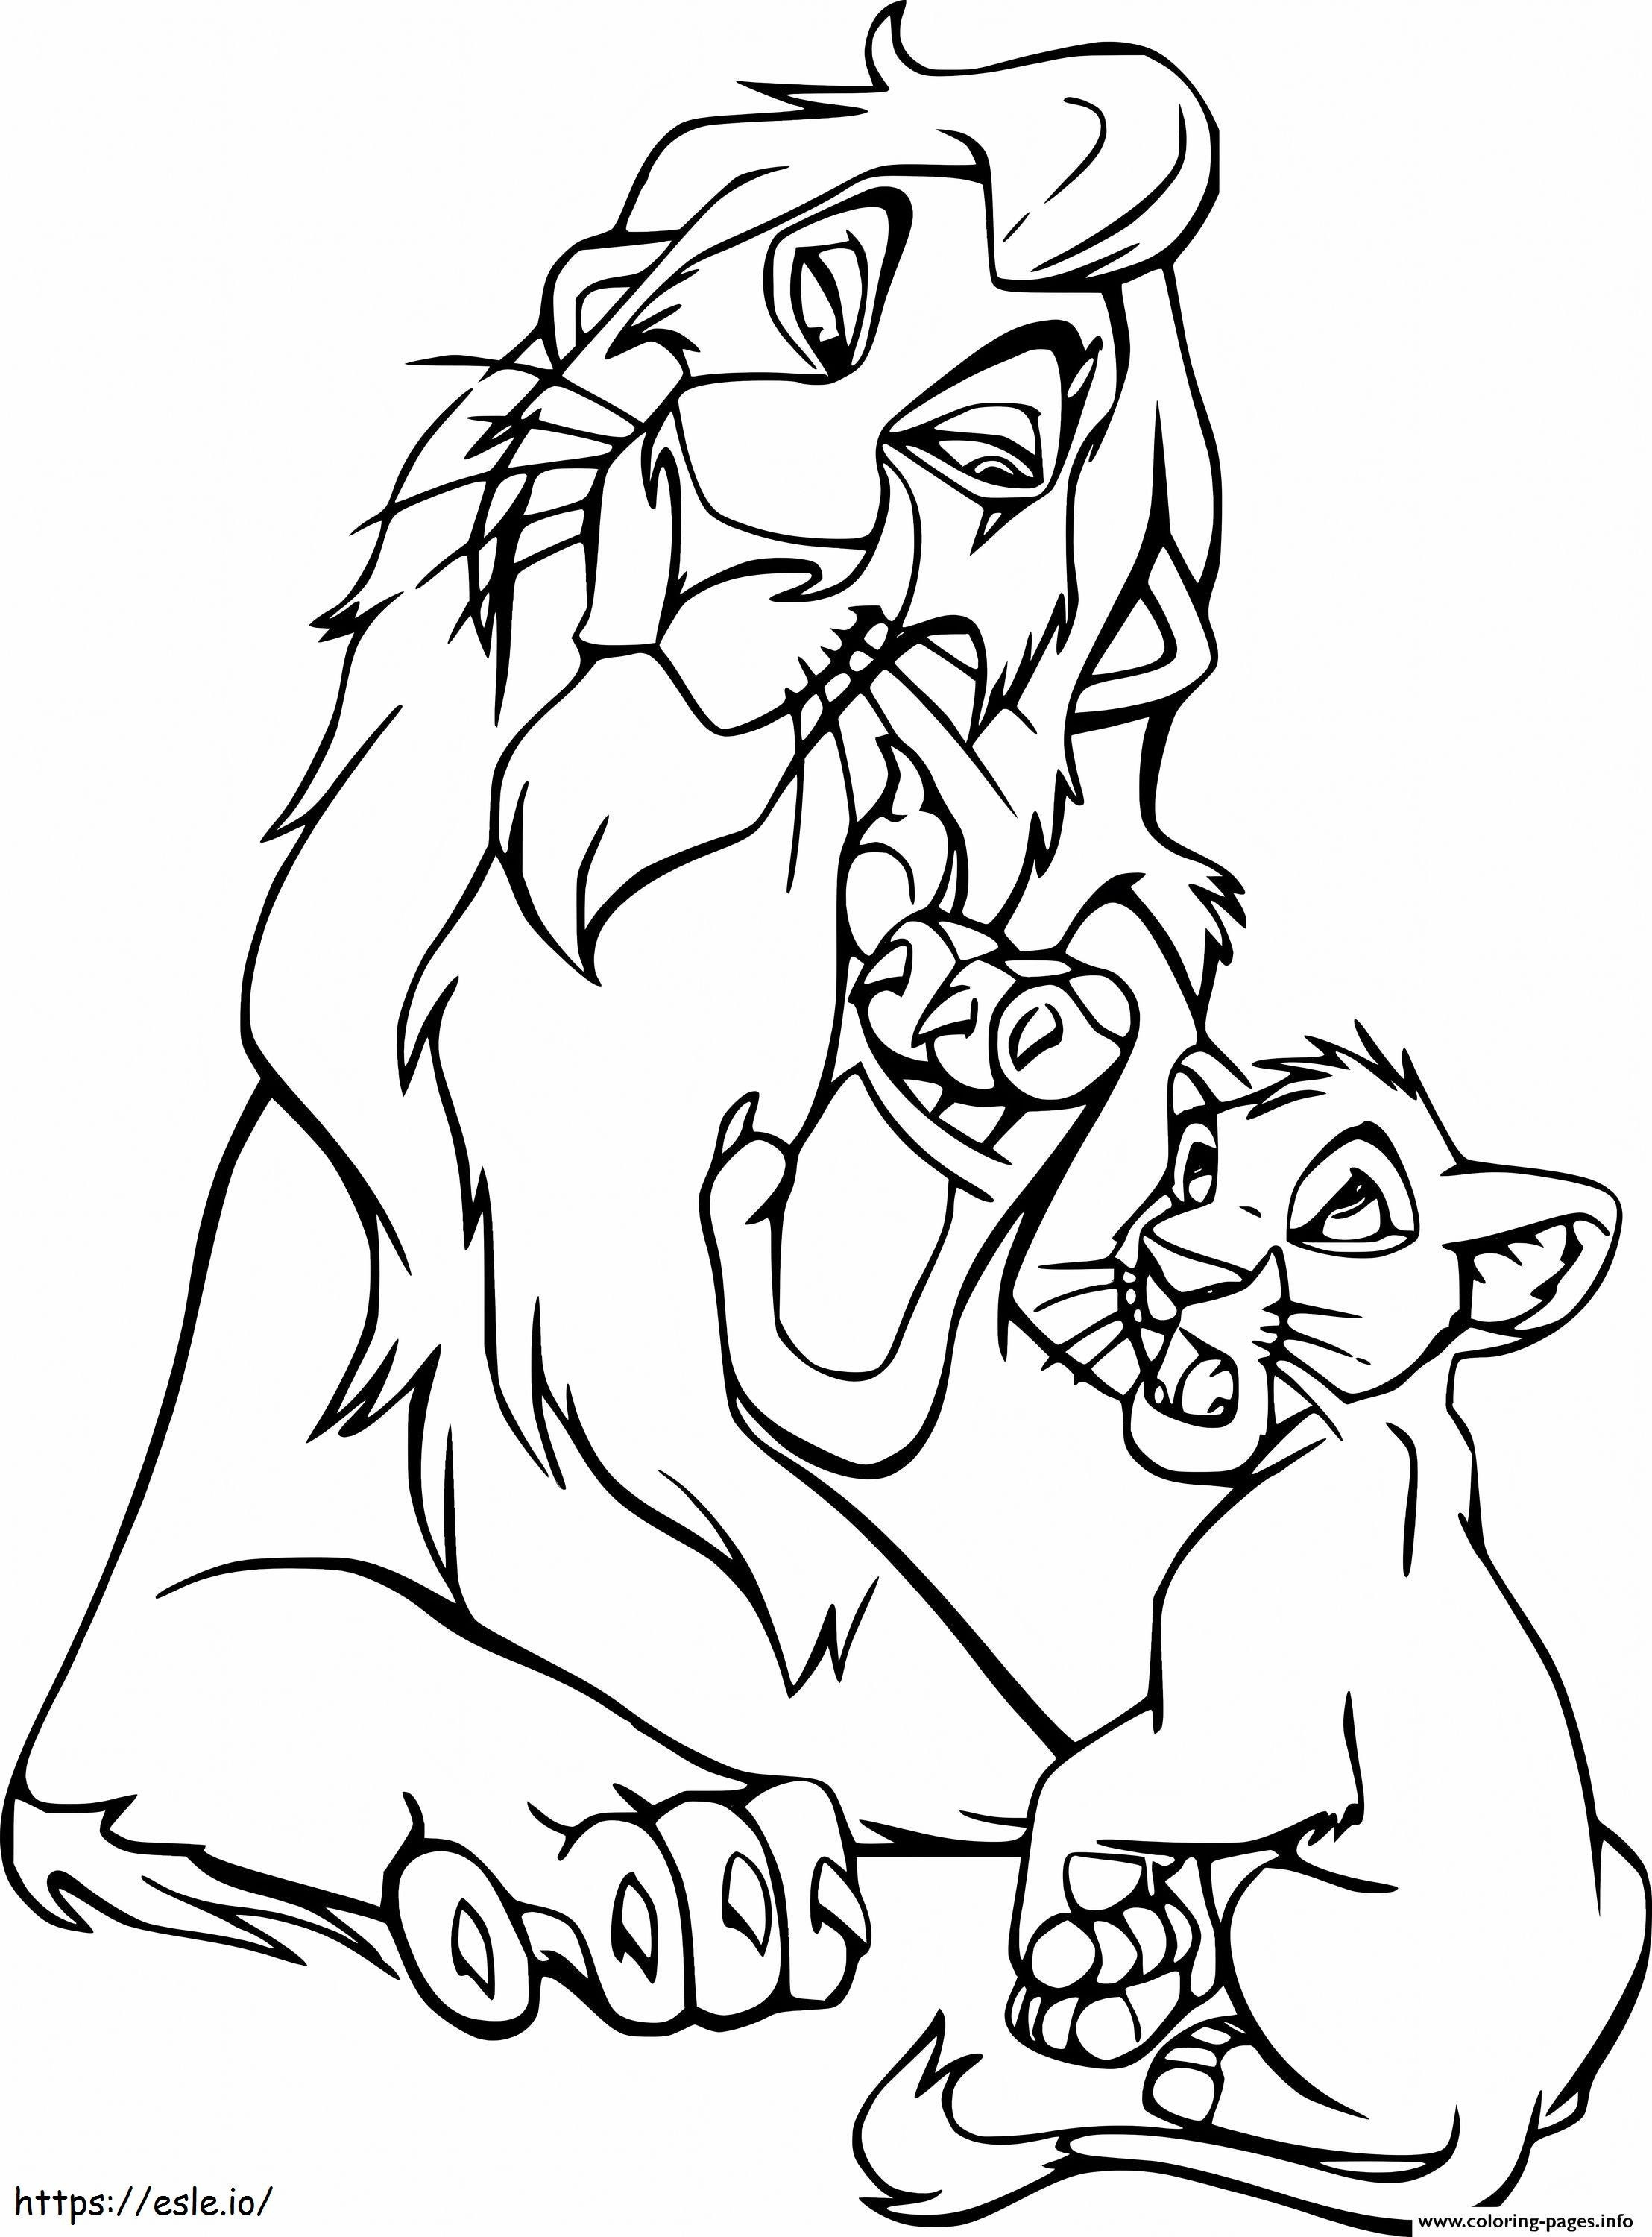 Scar And Simba coloring page